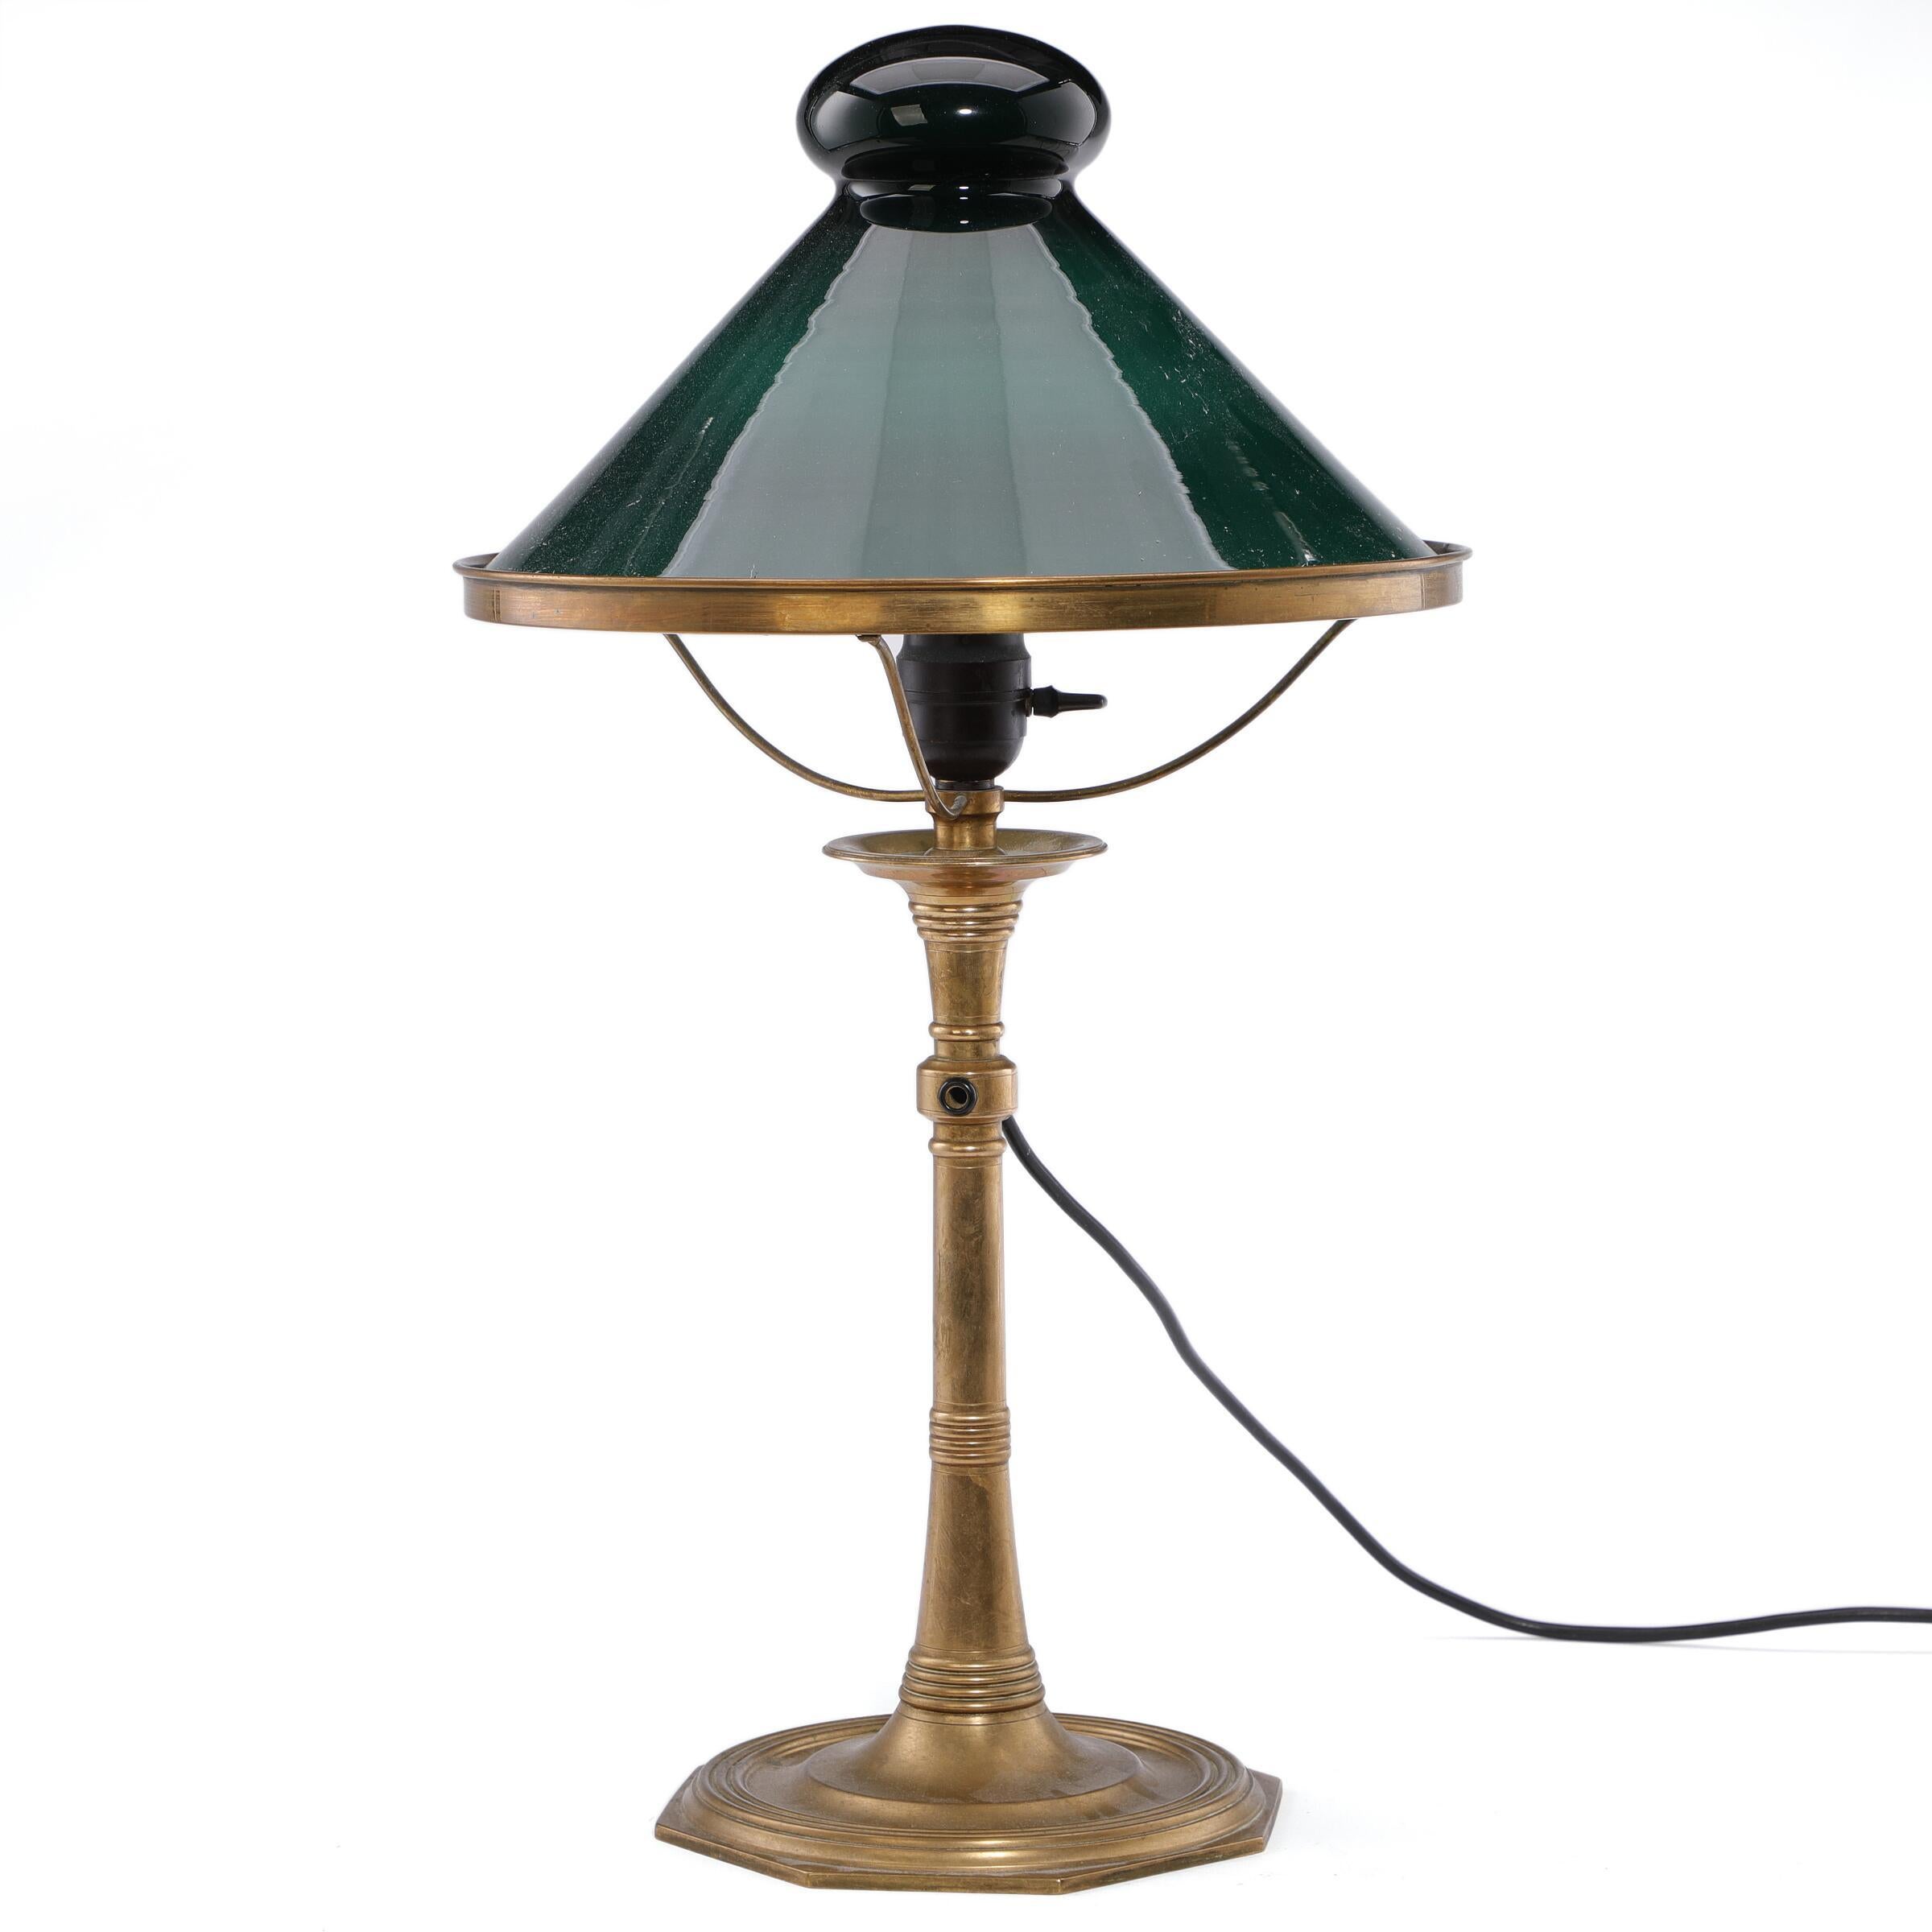 Martin Nyrop Brass table lamp. Shade of green opal glass. Performed approx. the beginning of the 20th century H. 55. Designed for Copenhagen City Hall.

Martin Nyrop (11 November 1849 on Holmsland by Ringkøbing Fjord – 18 May 1921 in